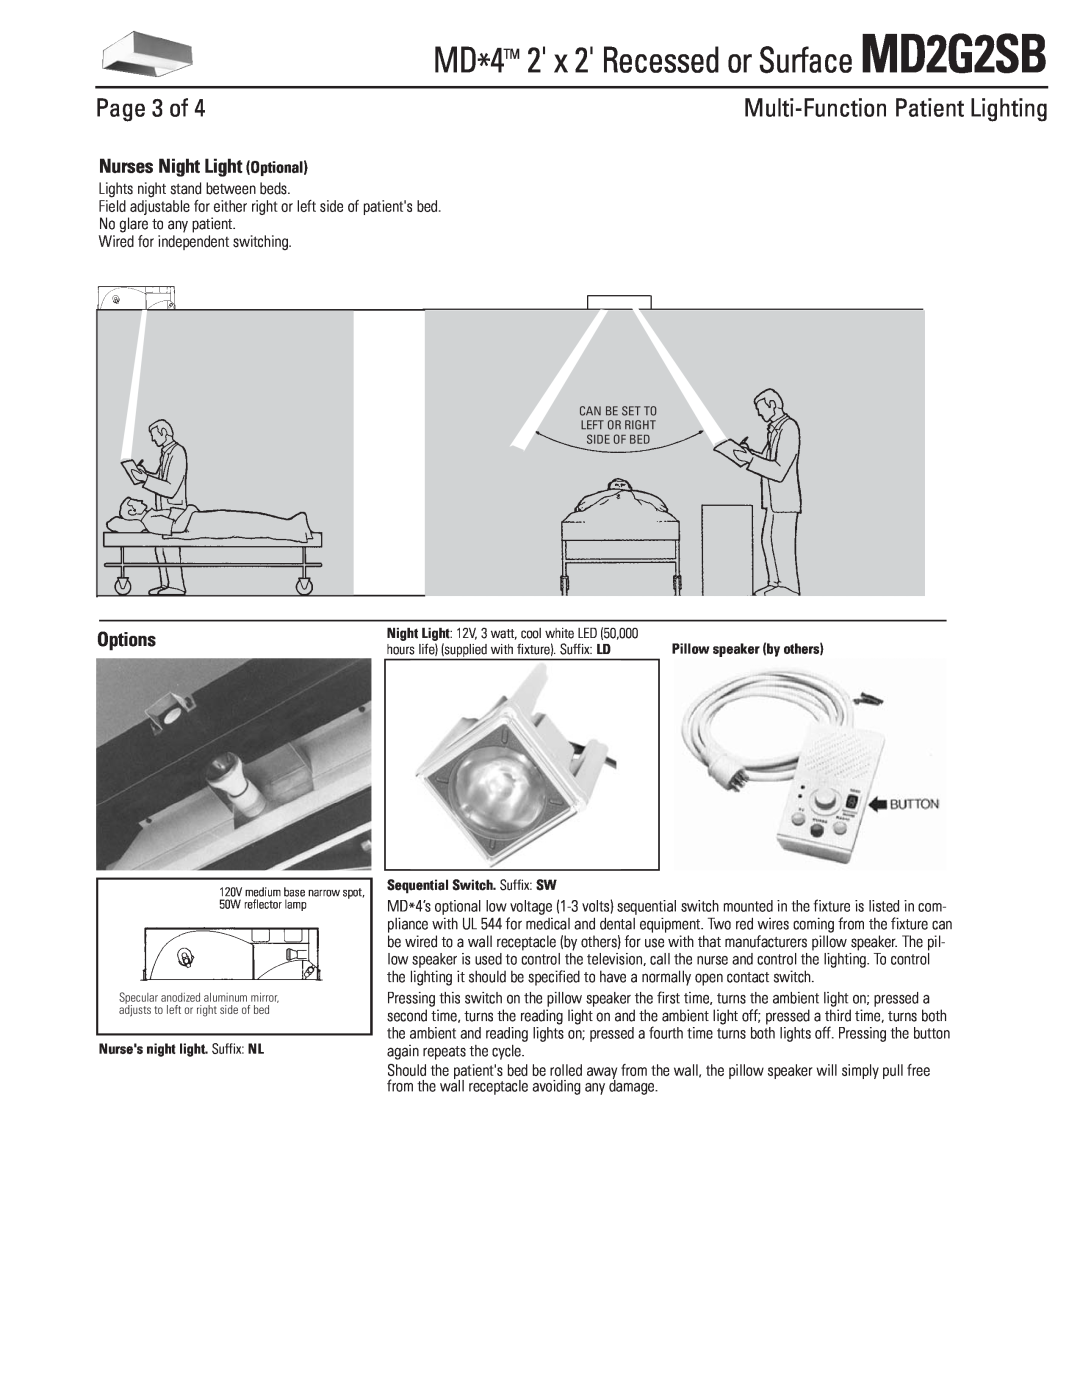 Lightolier dimensions Page 3 of, Nurses Night Light Optional, Options, MD*4TM 2 x 2 Recessed or Surface MD2G2SB 